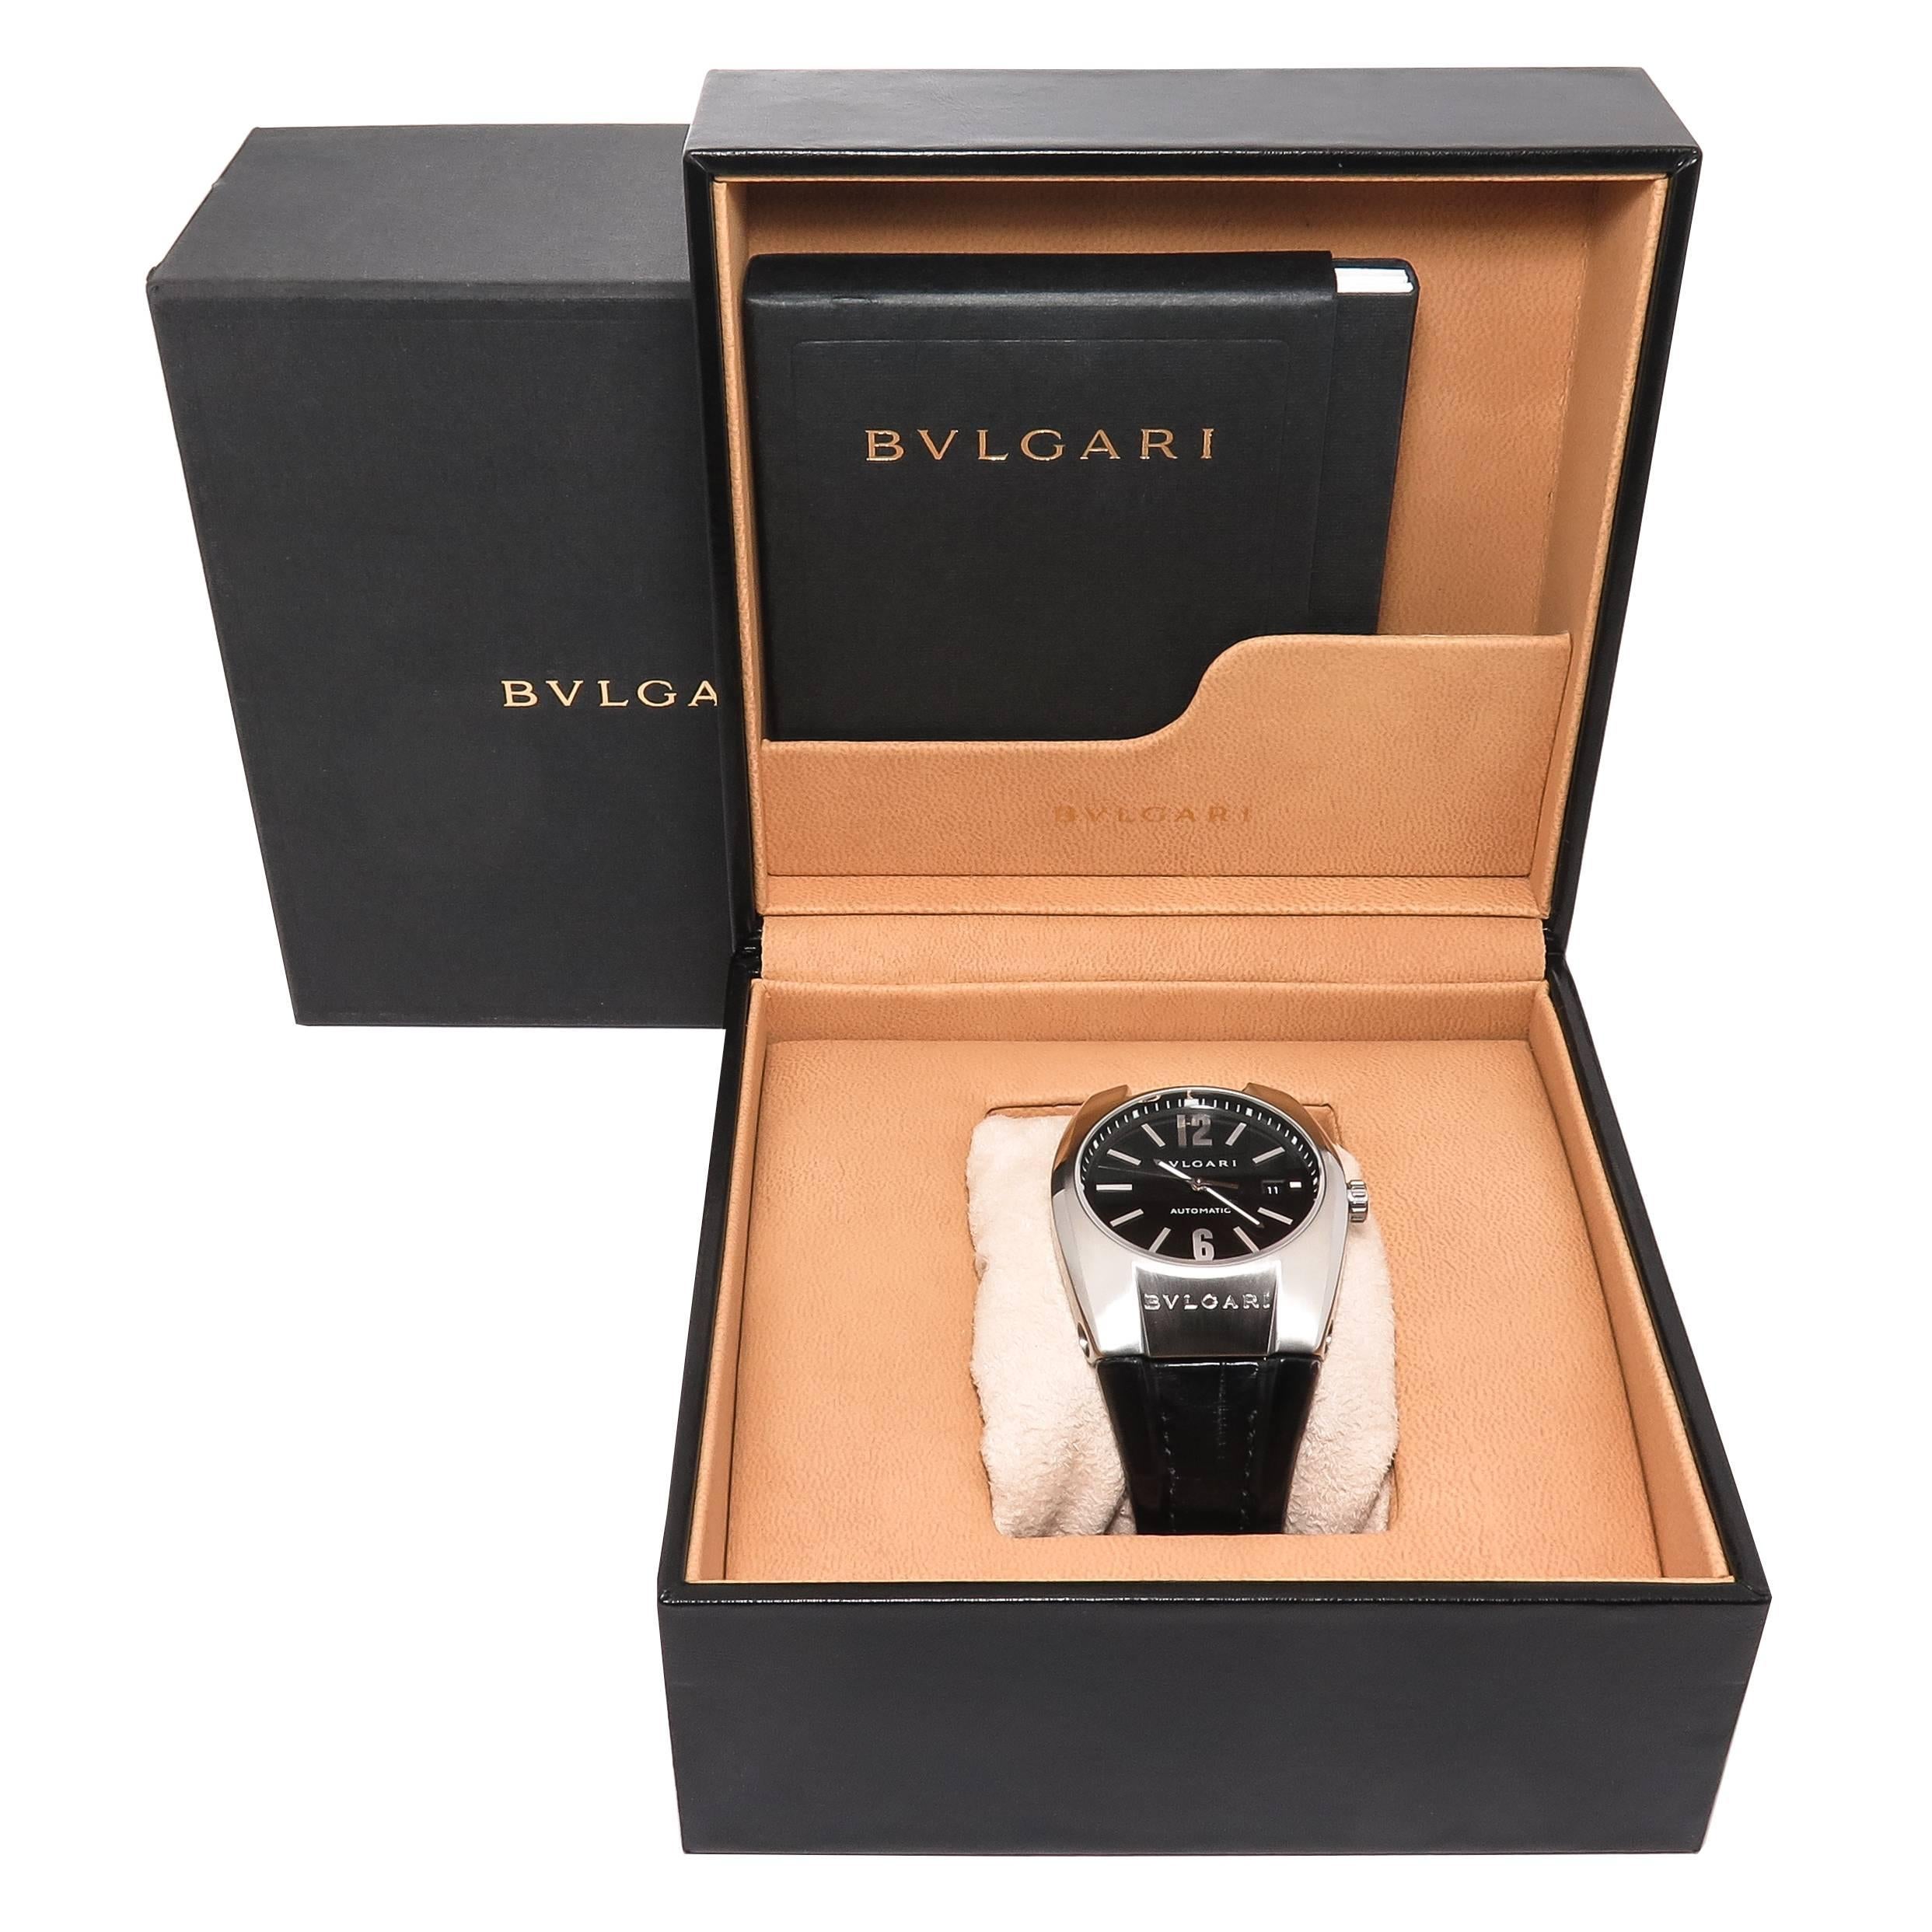 Circa 2014 Bulgari Ergon Wrist Watch, 40 MM stainless Steel Water Resistant  Case, Automatic, self winding movement, Black Dial with Raised Silver Markers, sweep seconds hand and a Calendar window at the 3 position. Scratch resistant, Sapphire Glass